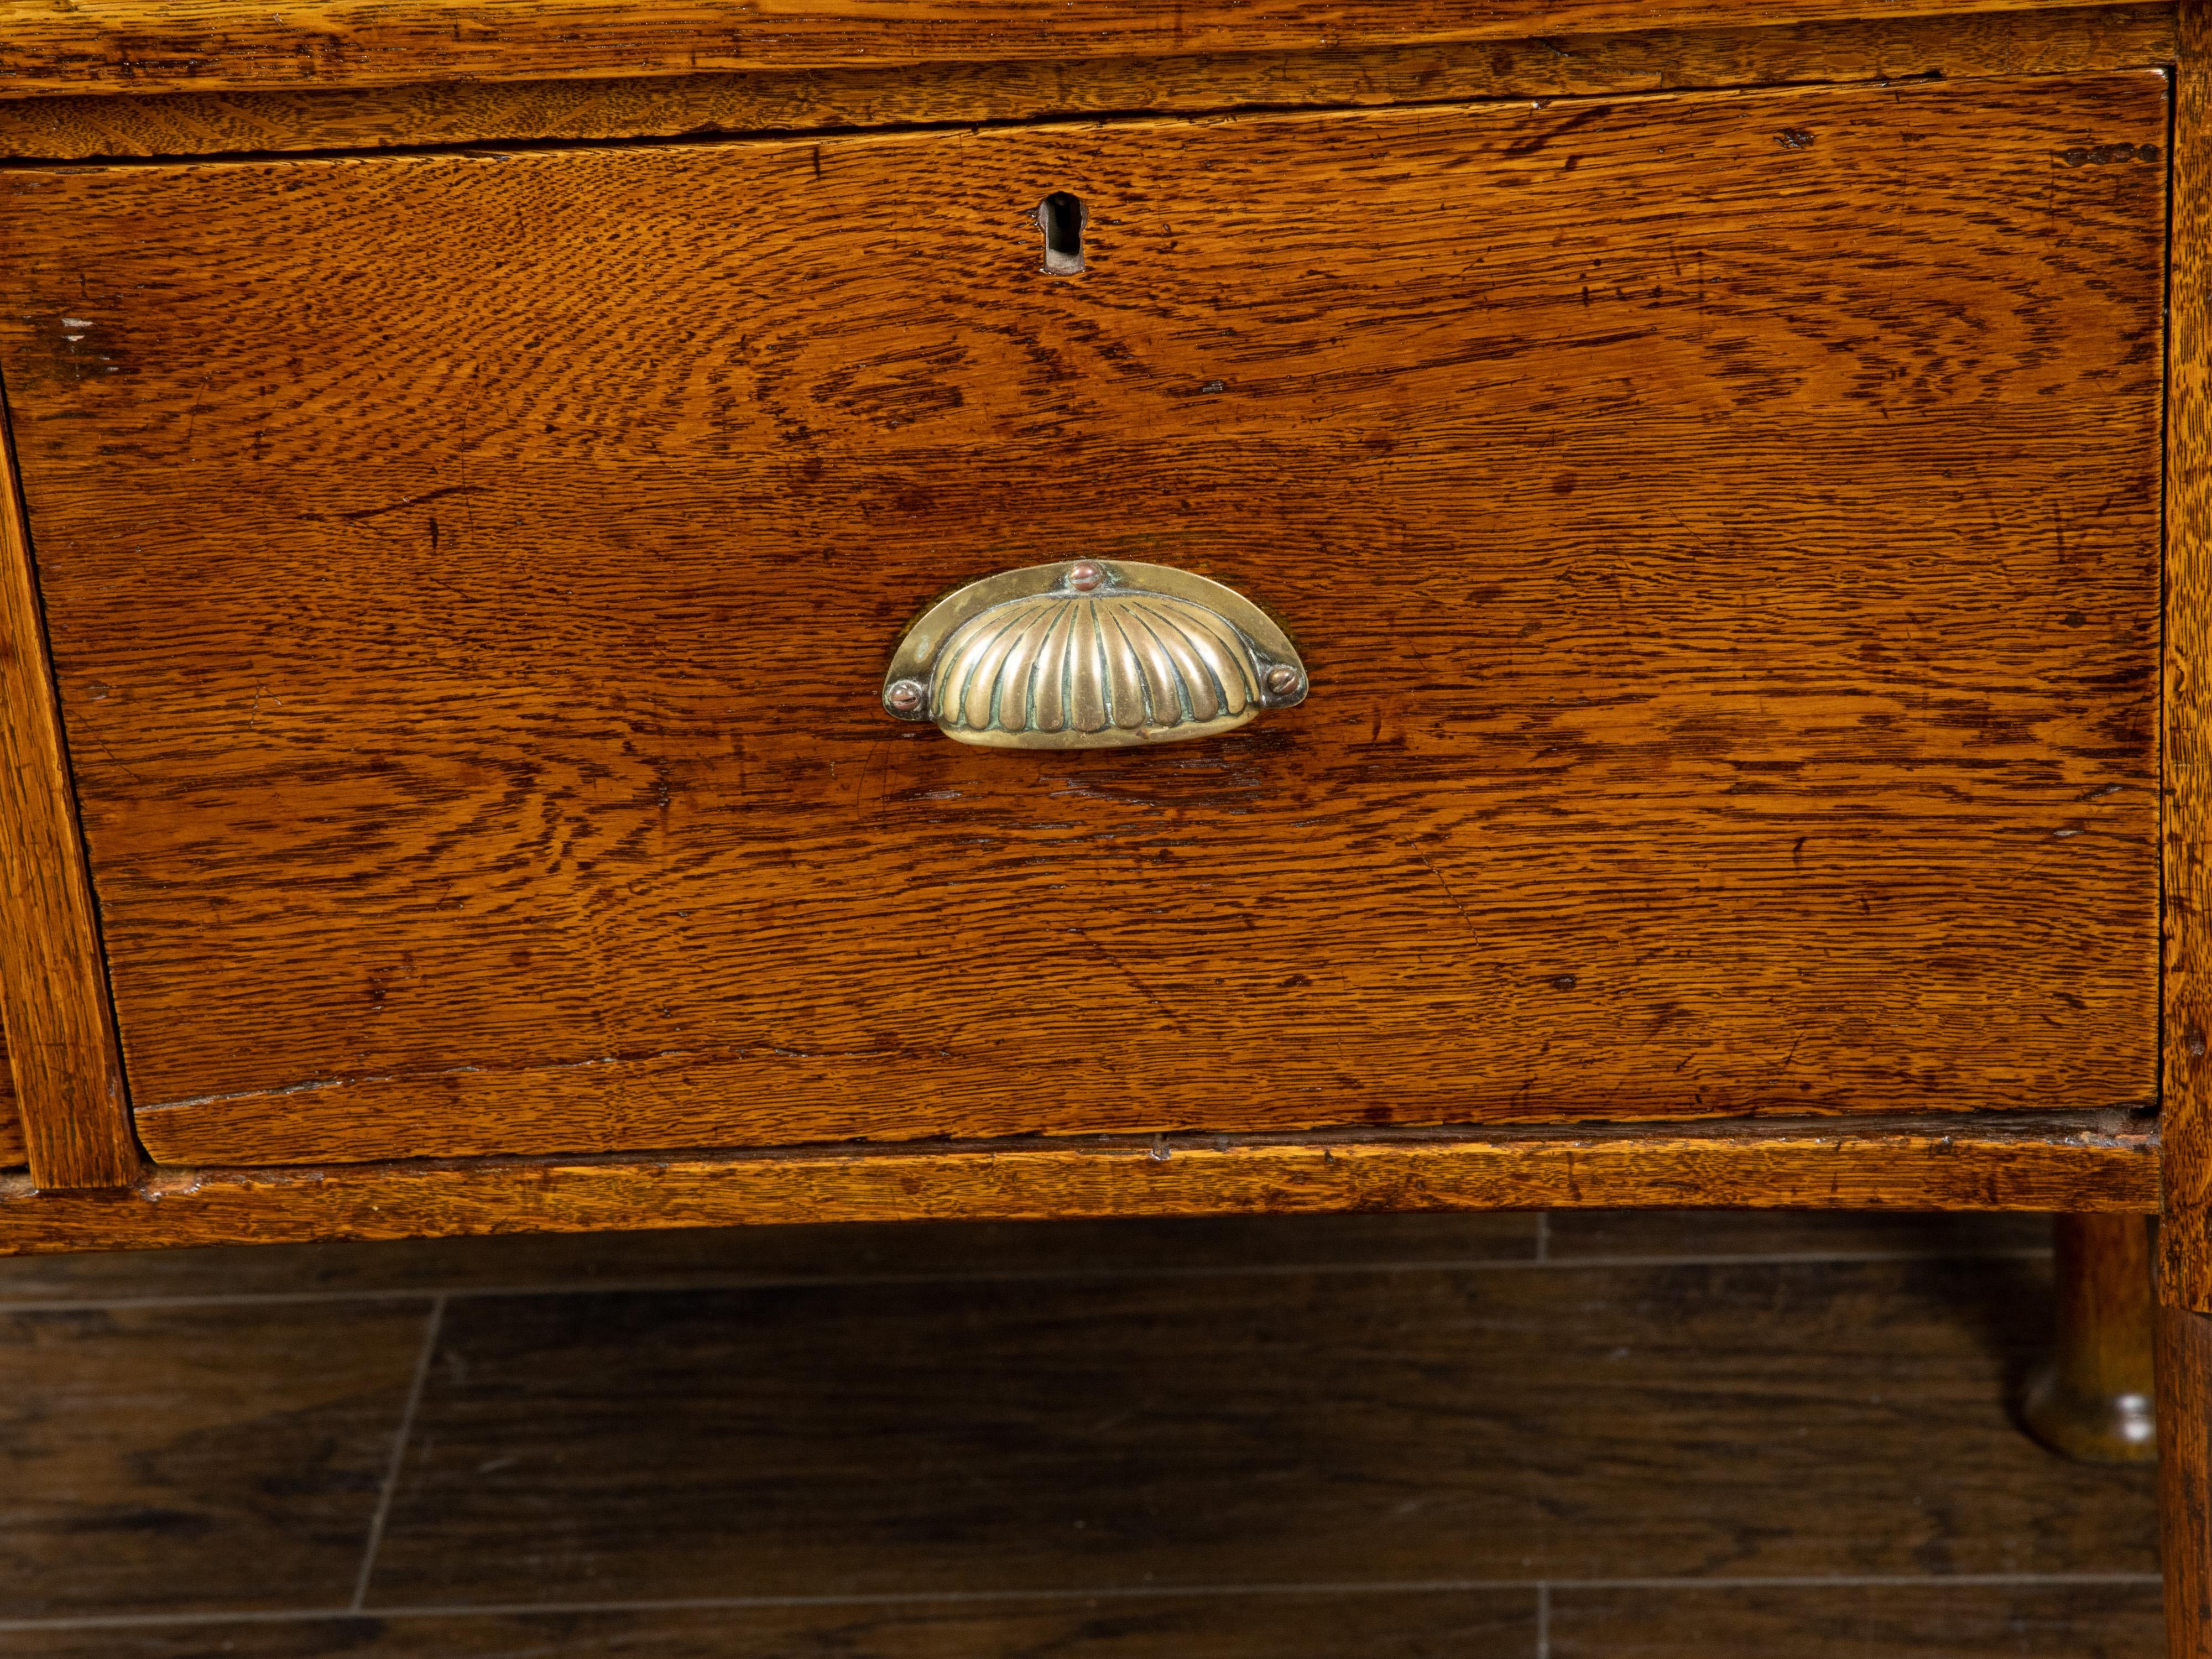 English 19th Century Oak Drop Leaves Draper's Table with Brass Measuring Tape For Sale 9